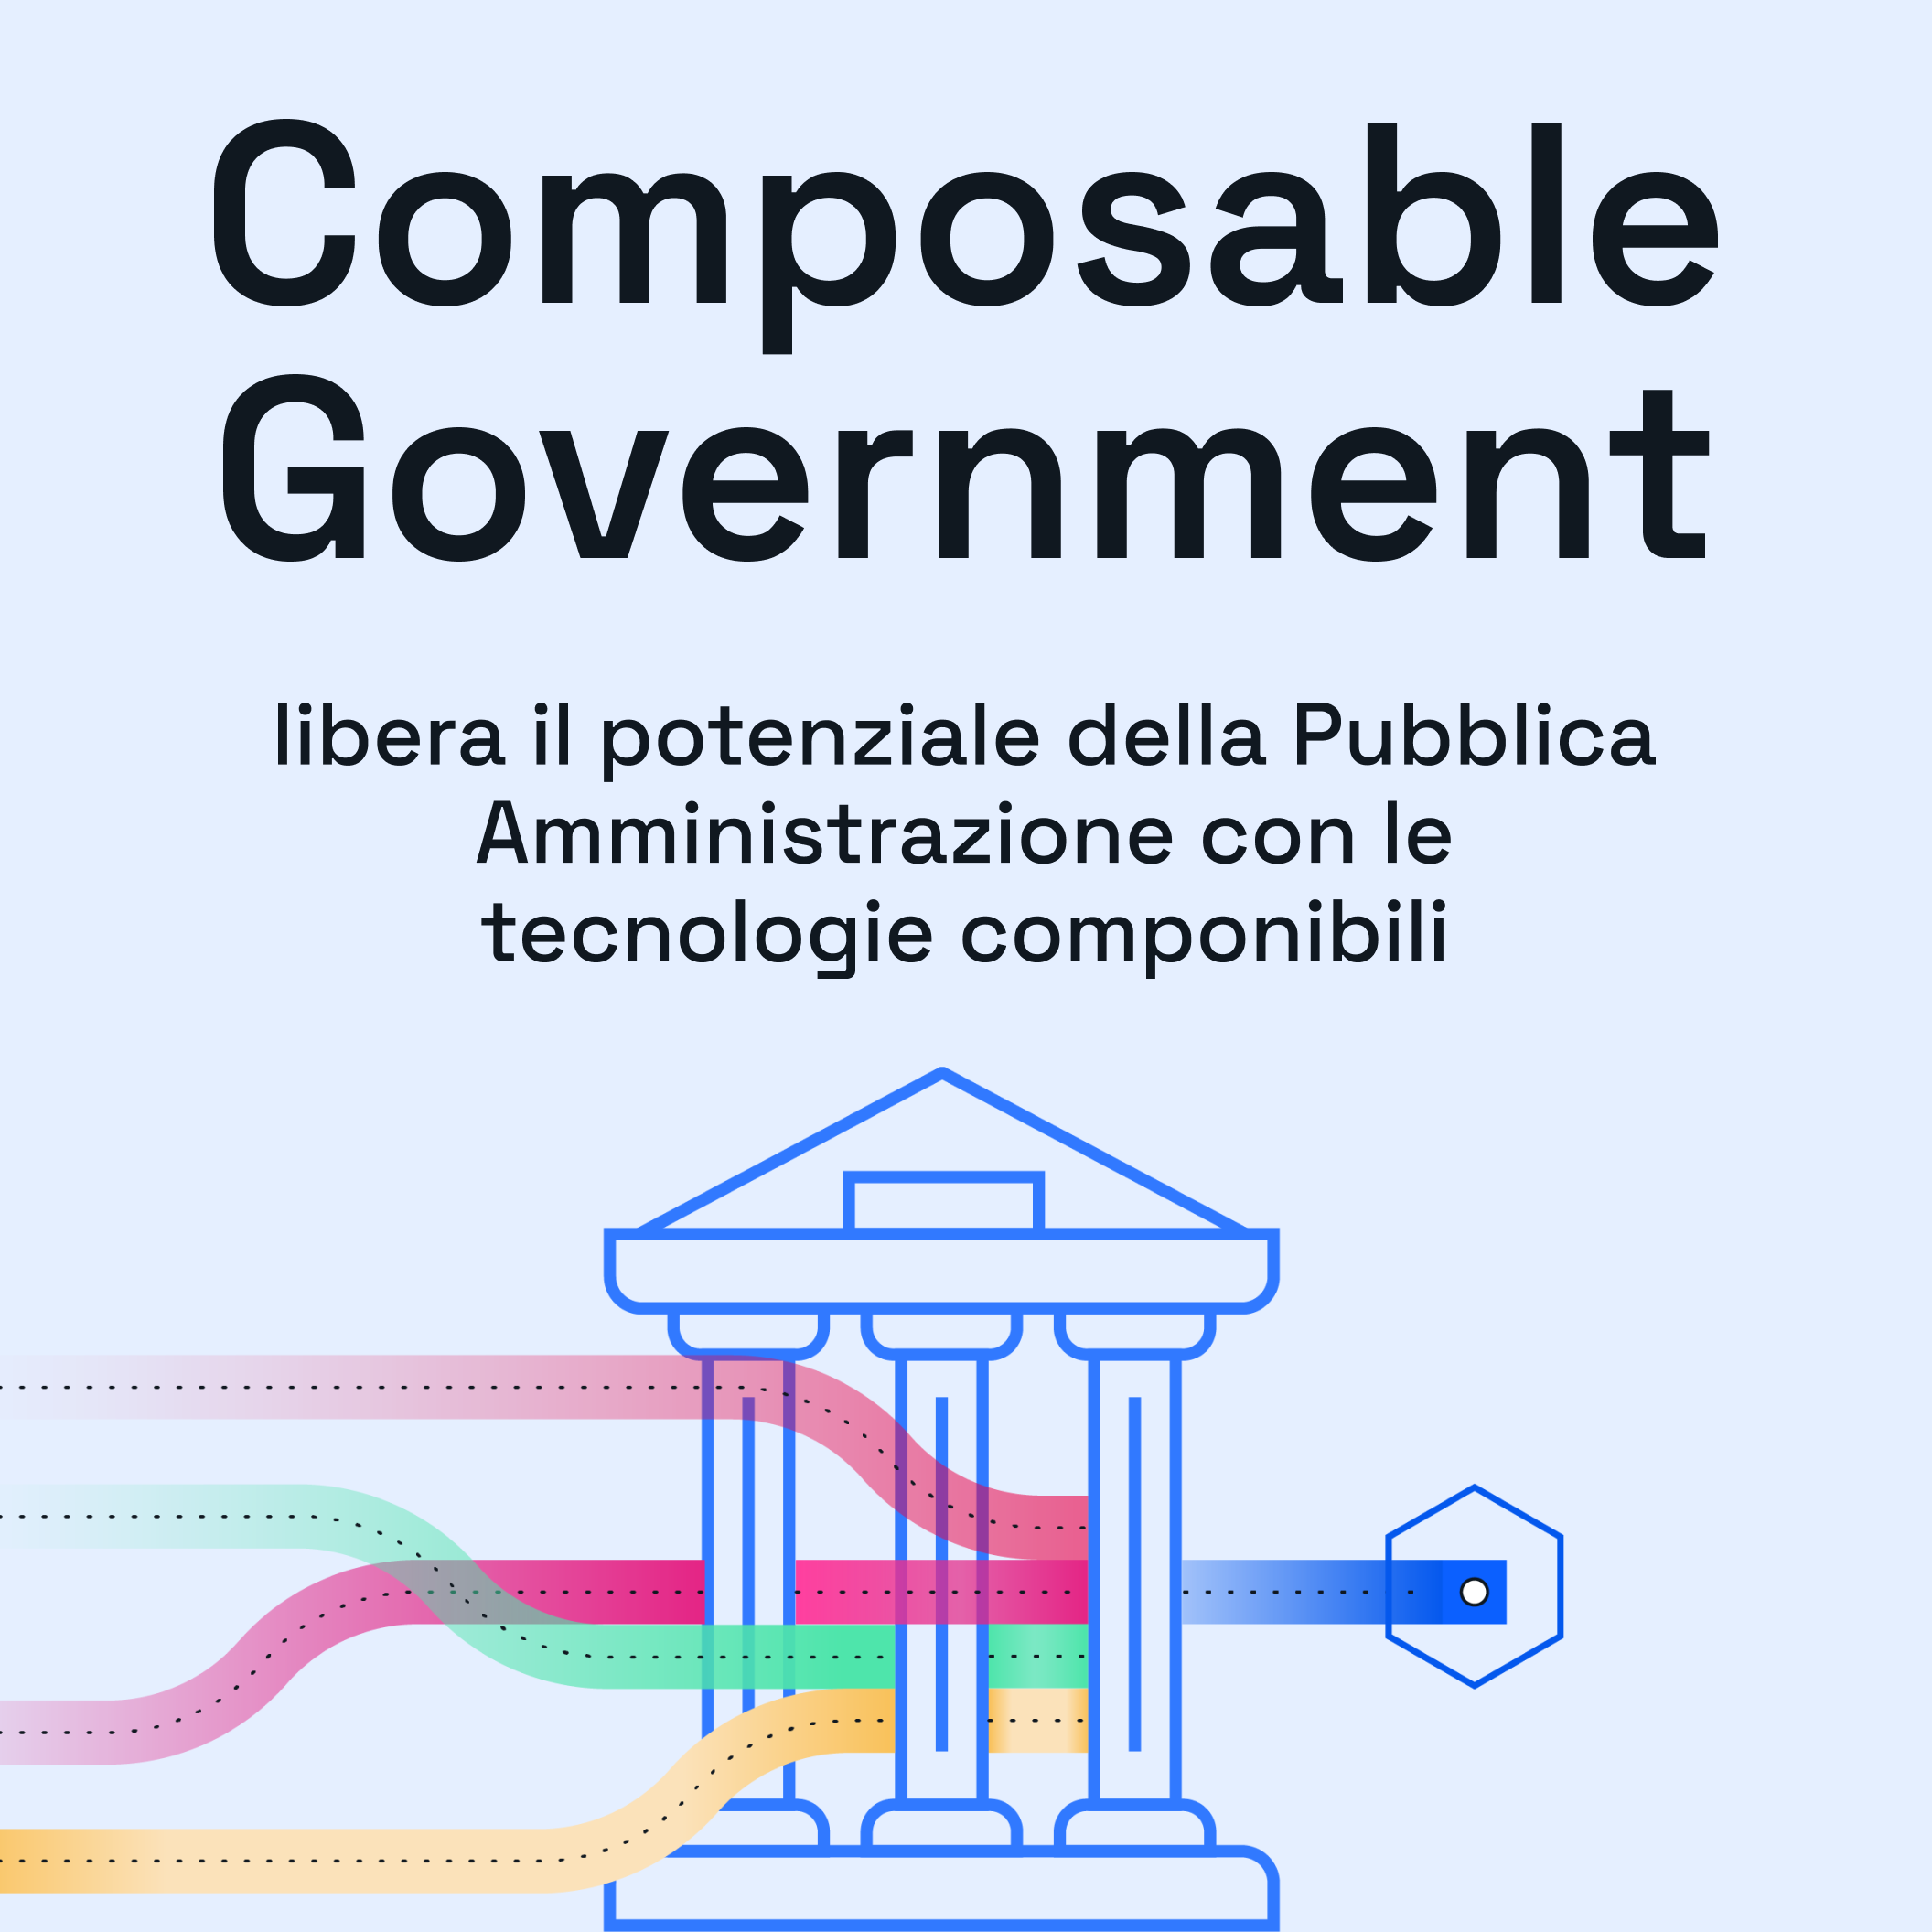 Composable_Government.png